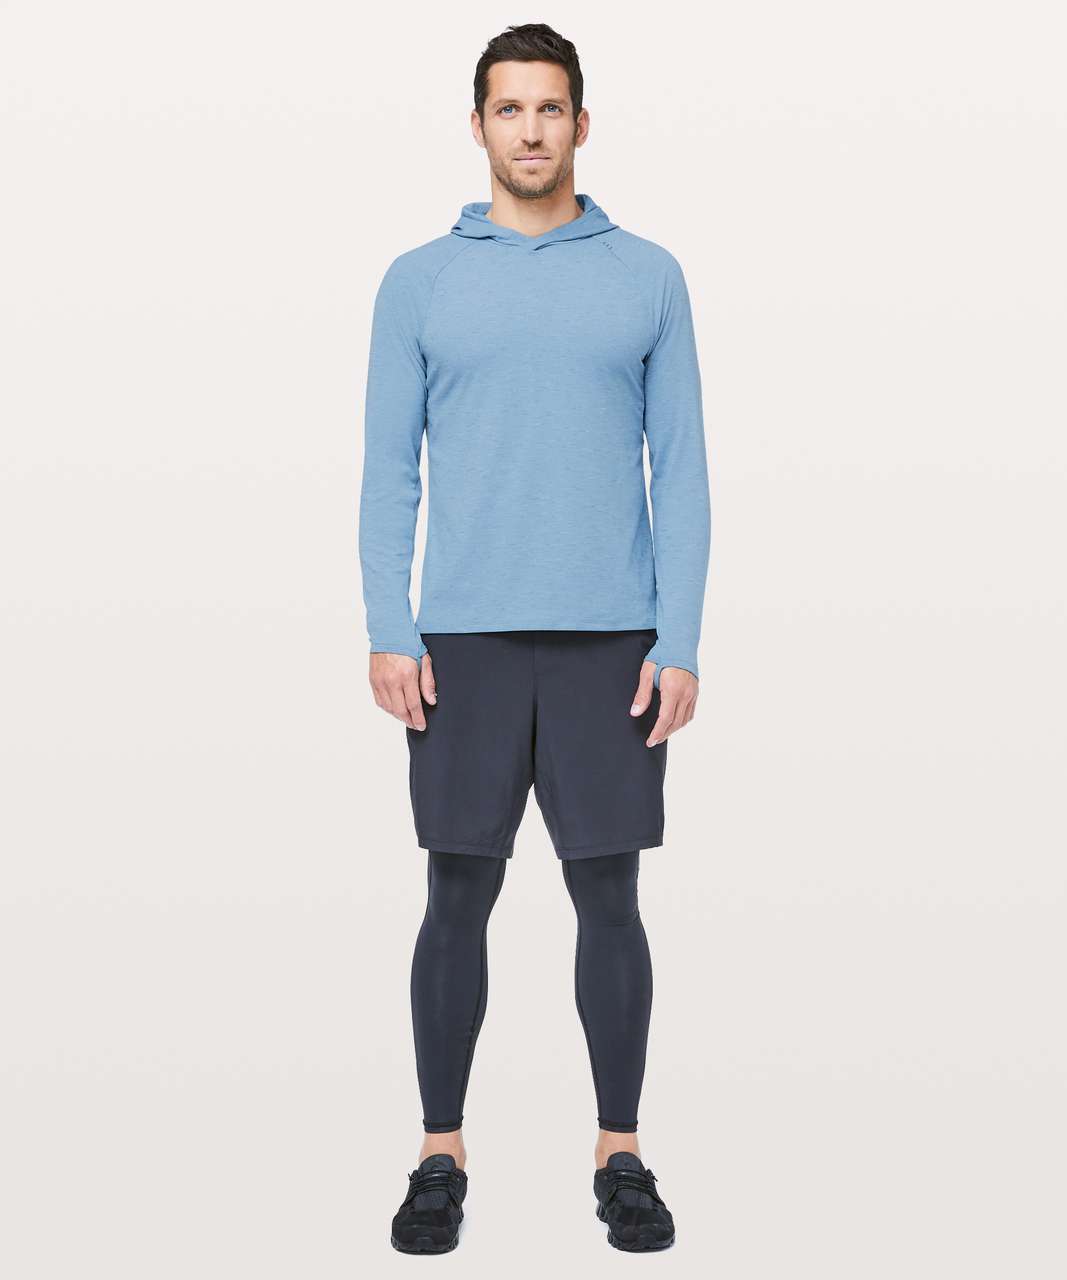 Lululemon Out Of Bounds Hoodie - Heathered Utility Blue